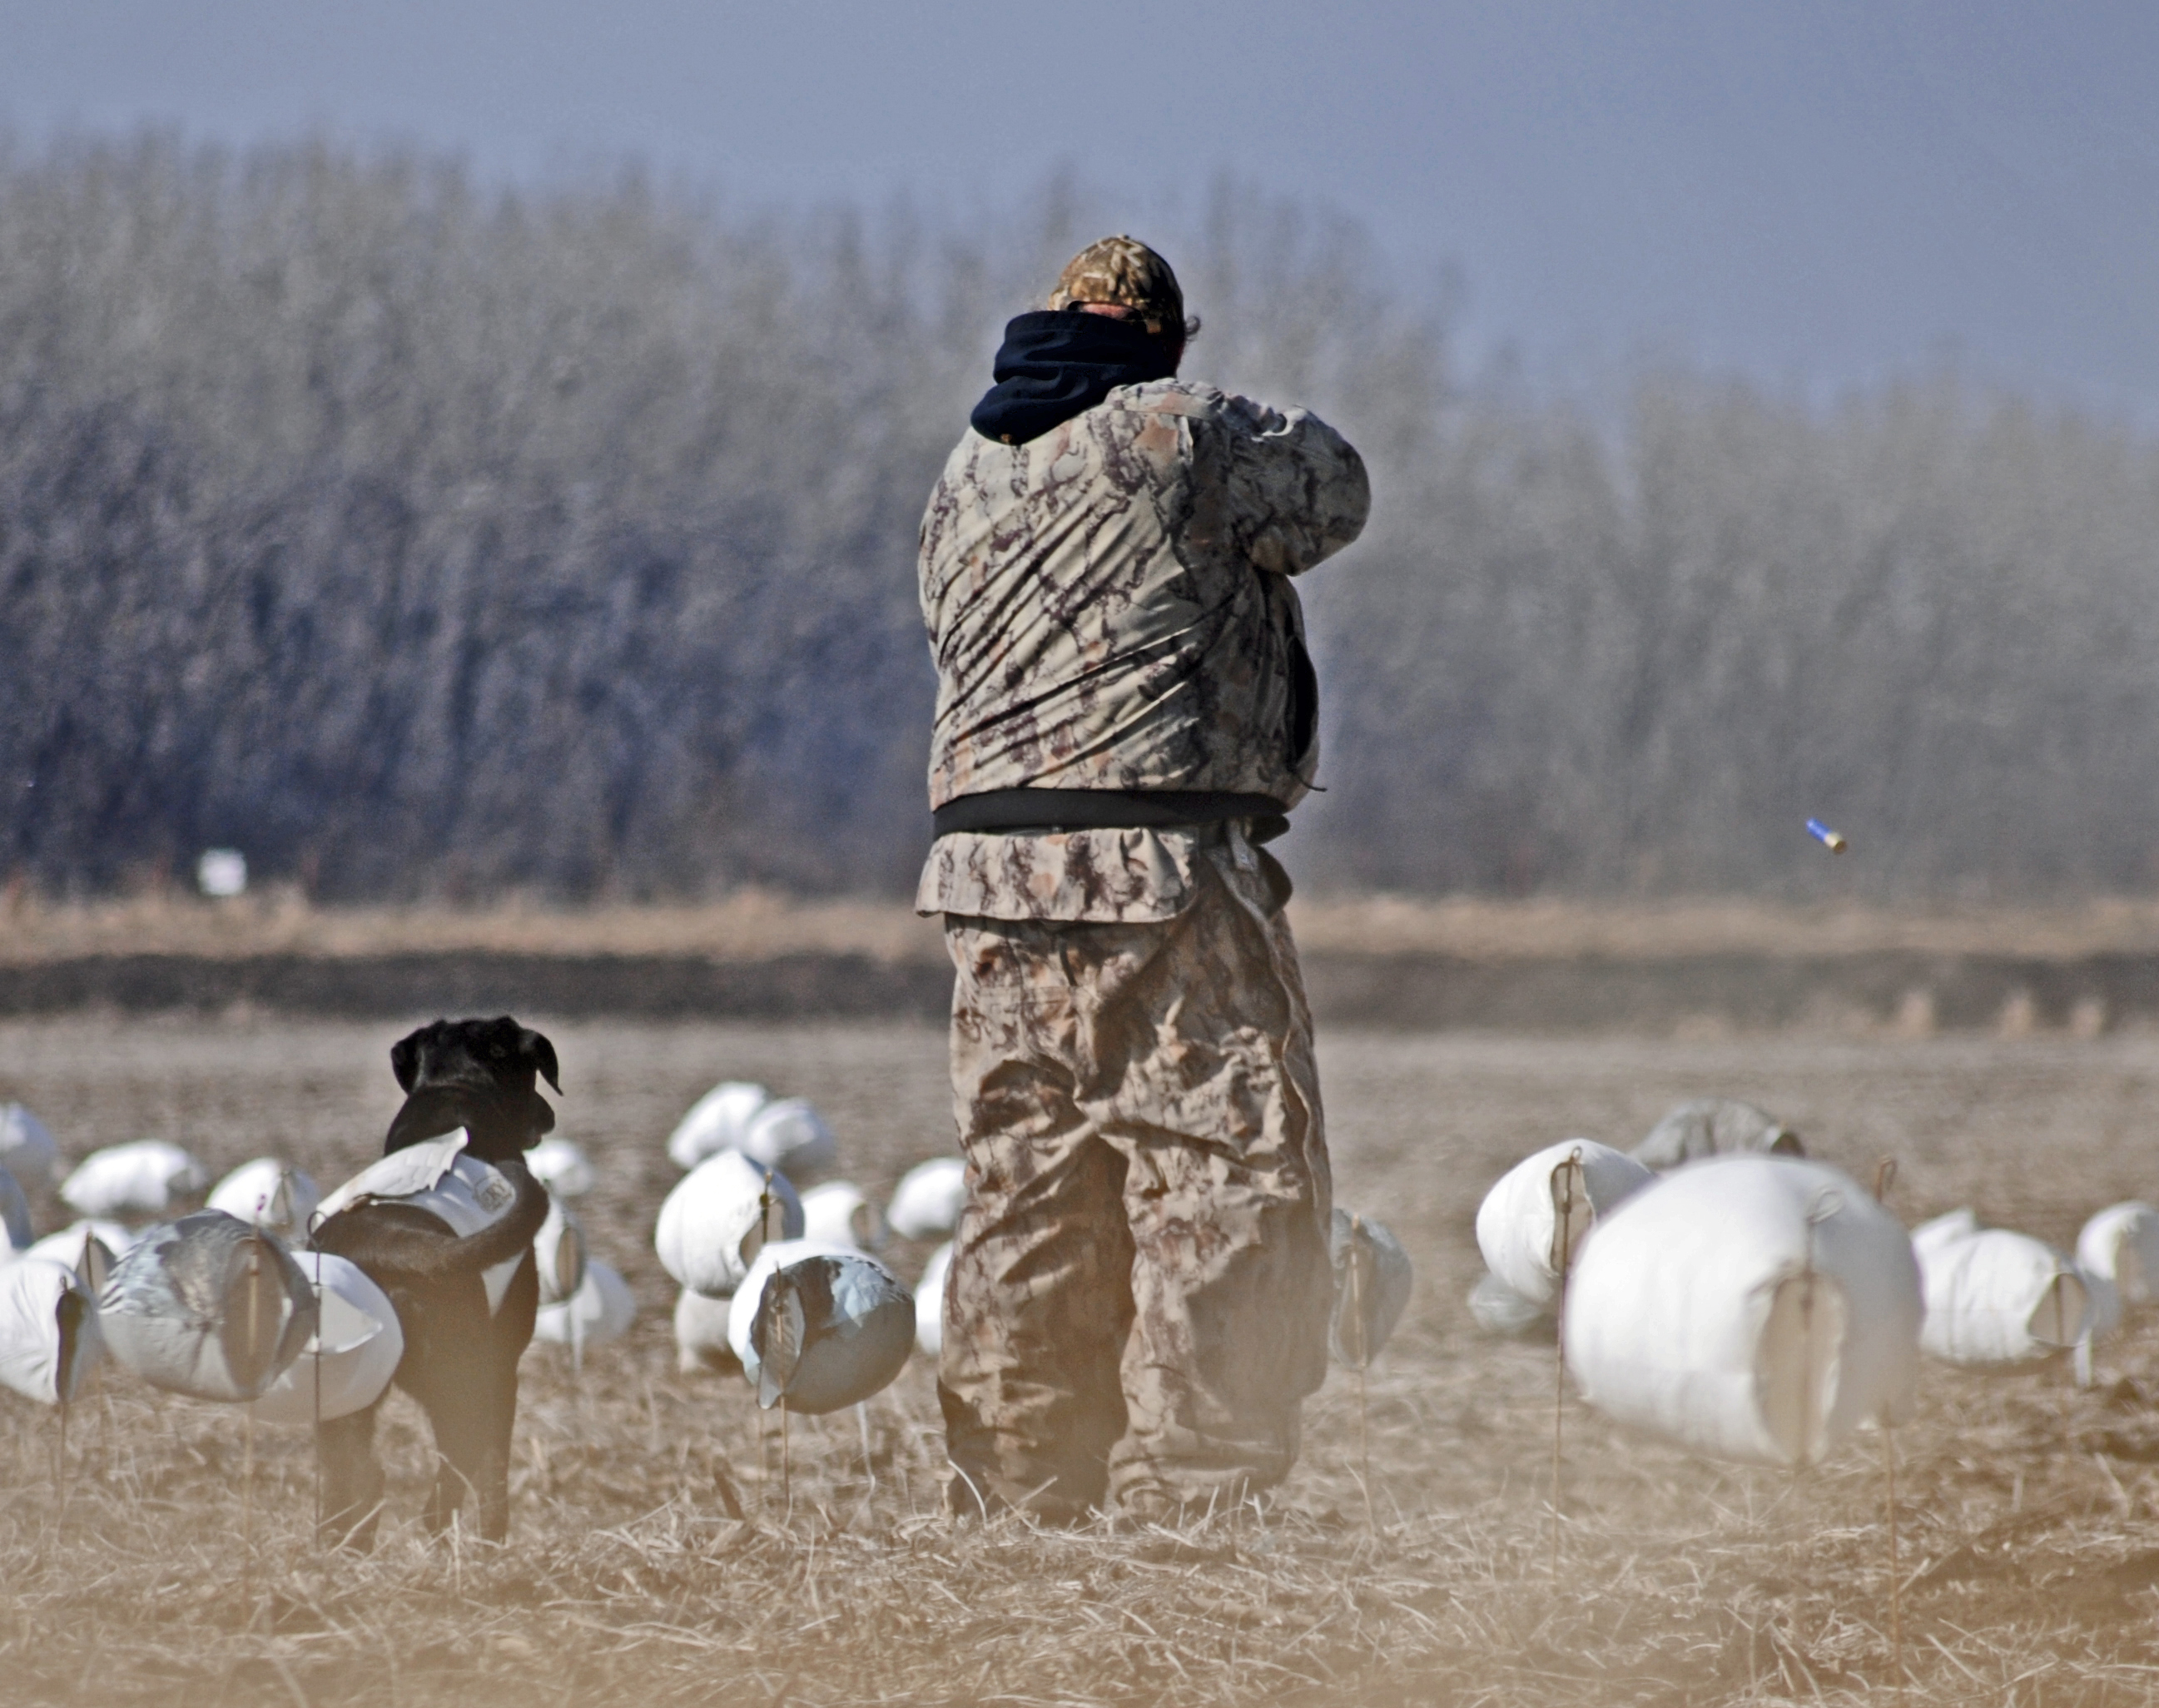 Introducing Your waterfowl Hunting Dog to Gunfire